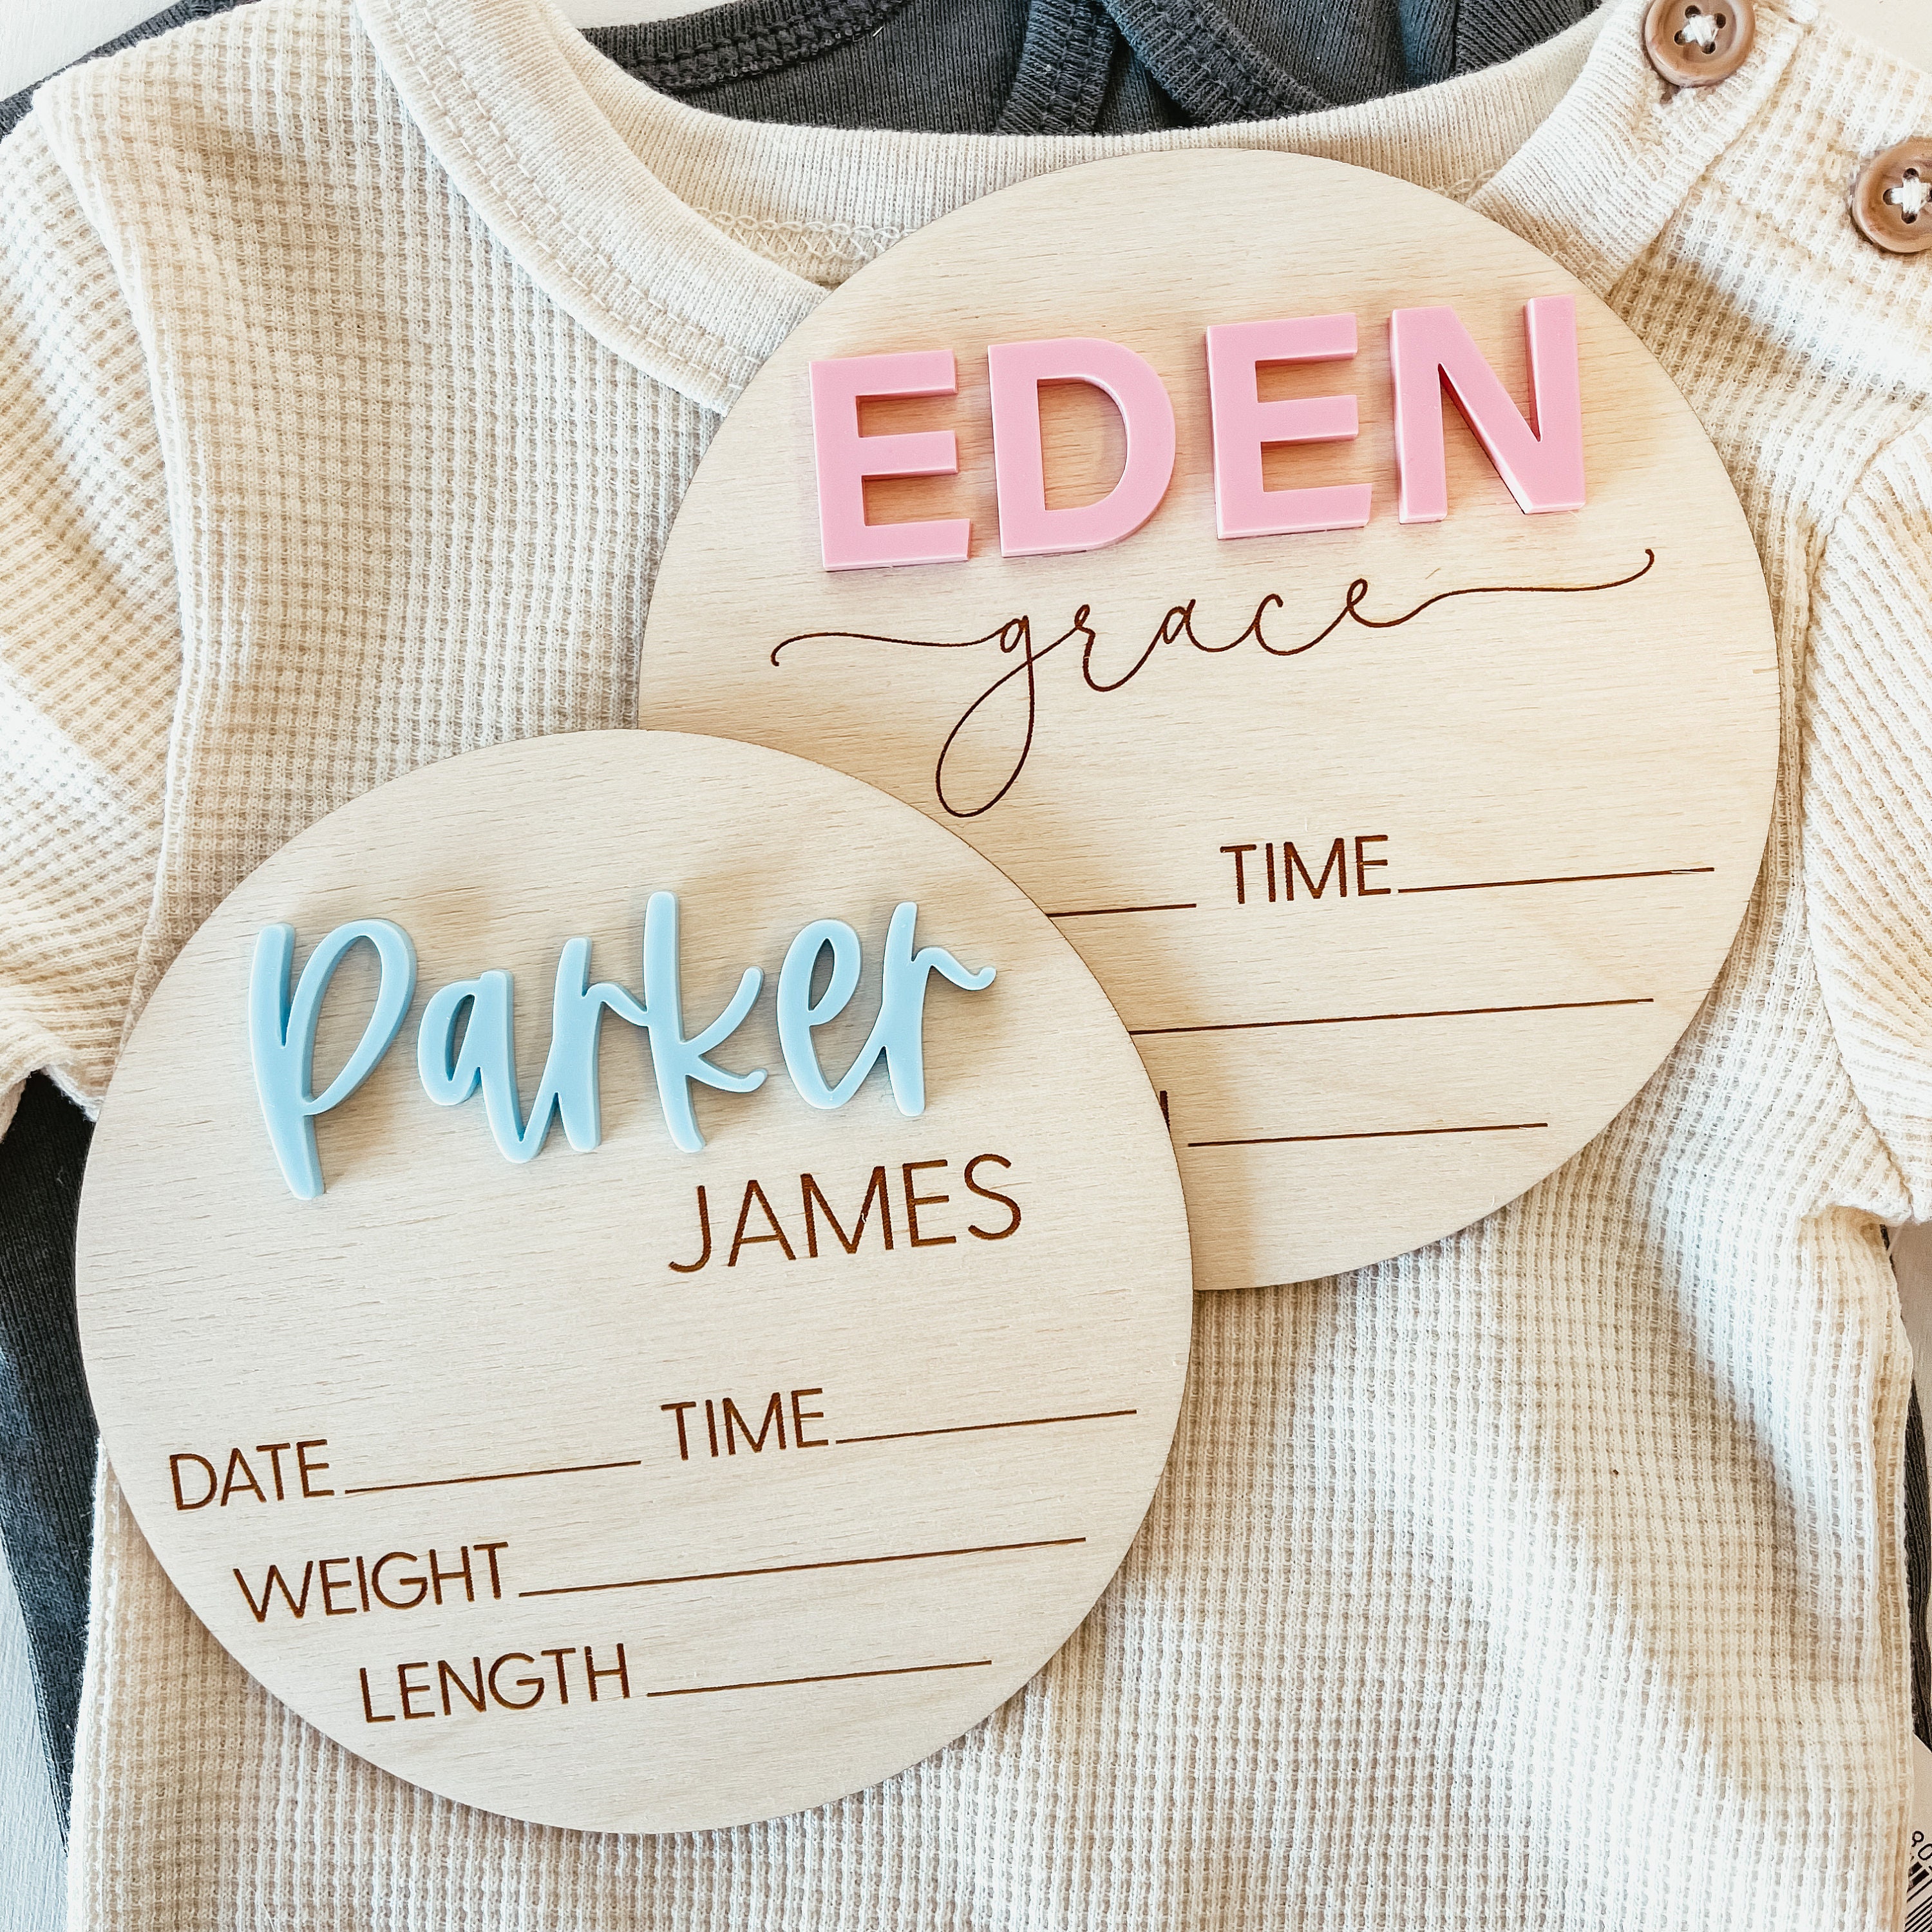 7.87 Inch Birth Announcement Sign Baby Announcement Sign Wooden Newborn Sign Baby Name Sign Round Wood Plaque with Black Paint Marker for Baby Name and Birth Detail 